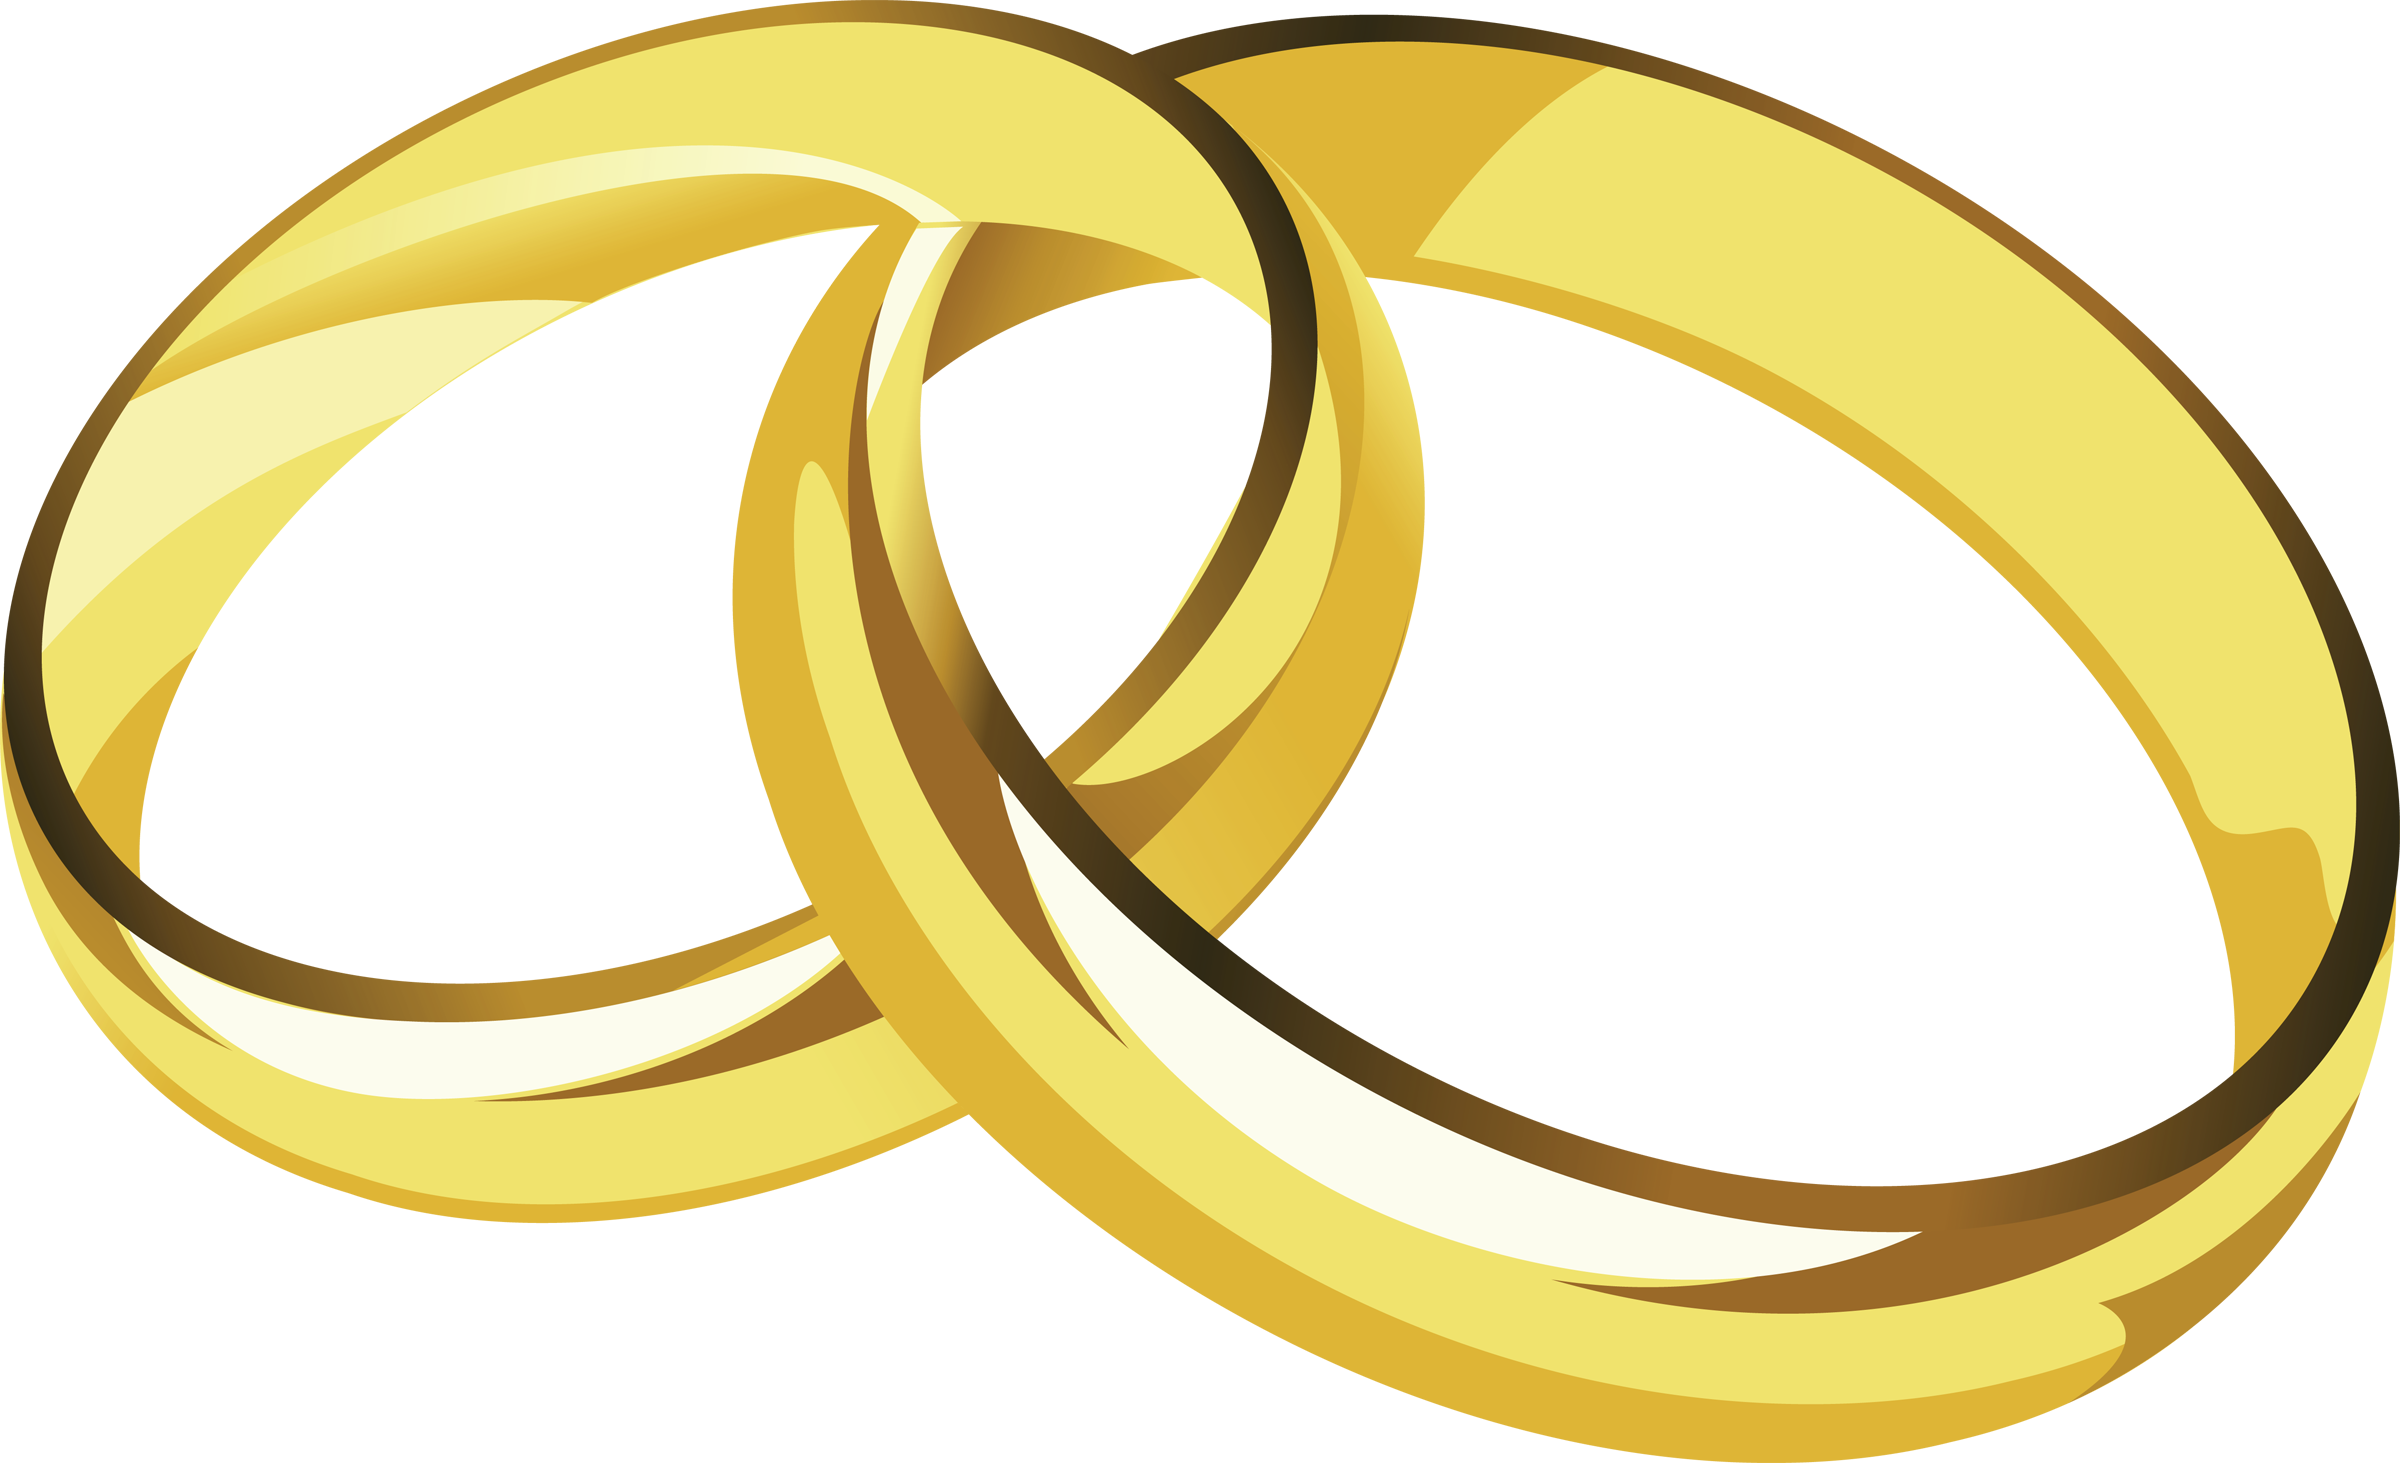 Wedding rings clipart clipartfest 2